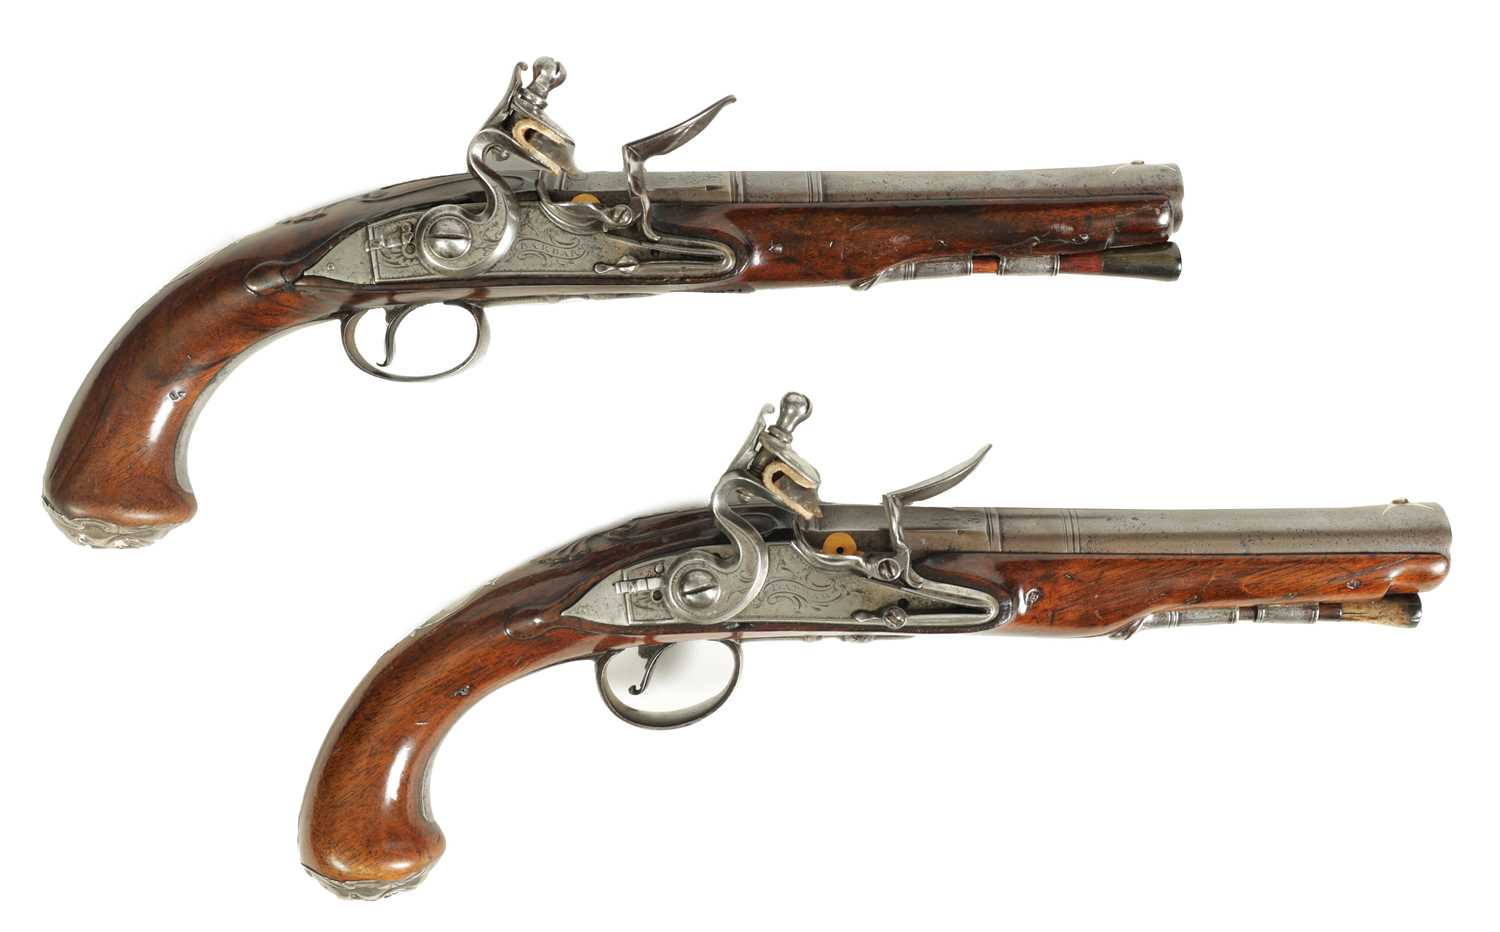 A PAIR OF 18TH CENTURY SILVER-MOUNTED ENGLISH FLINTLOCK PISTOLS BY BARBAR, LONDON.